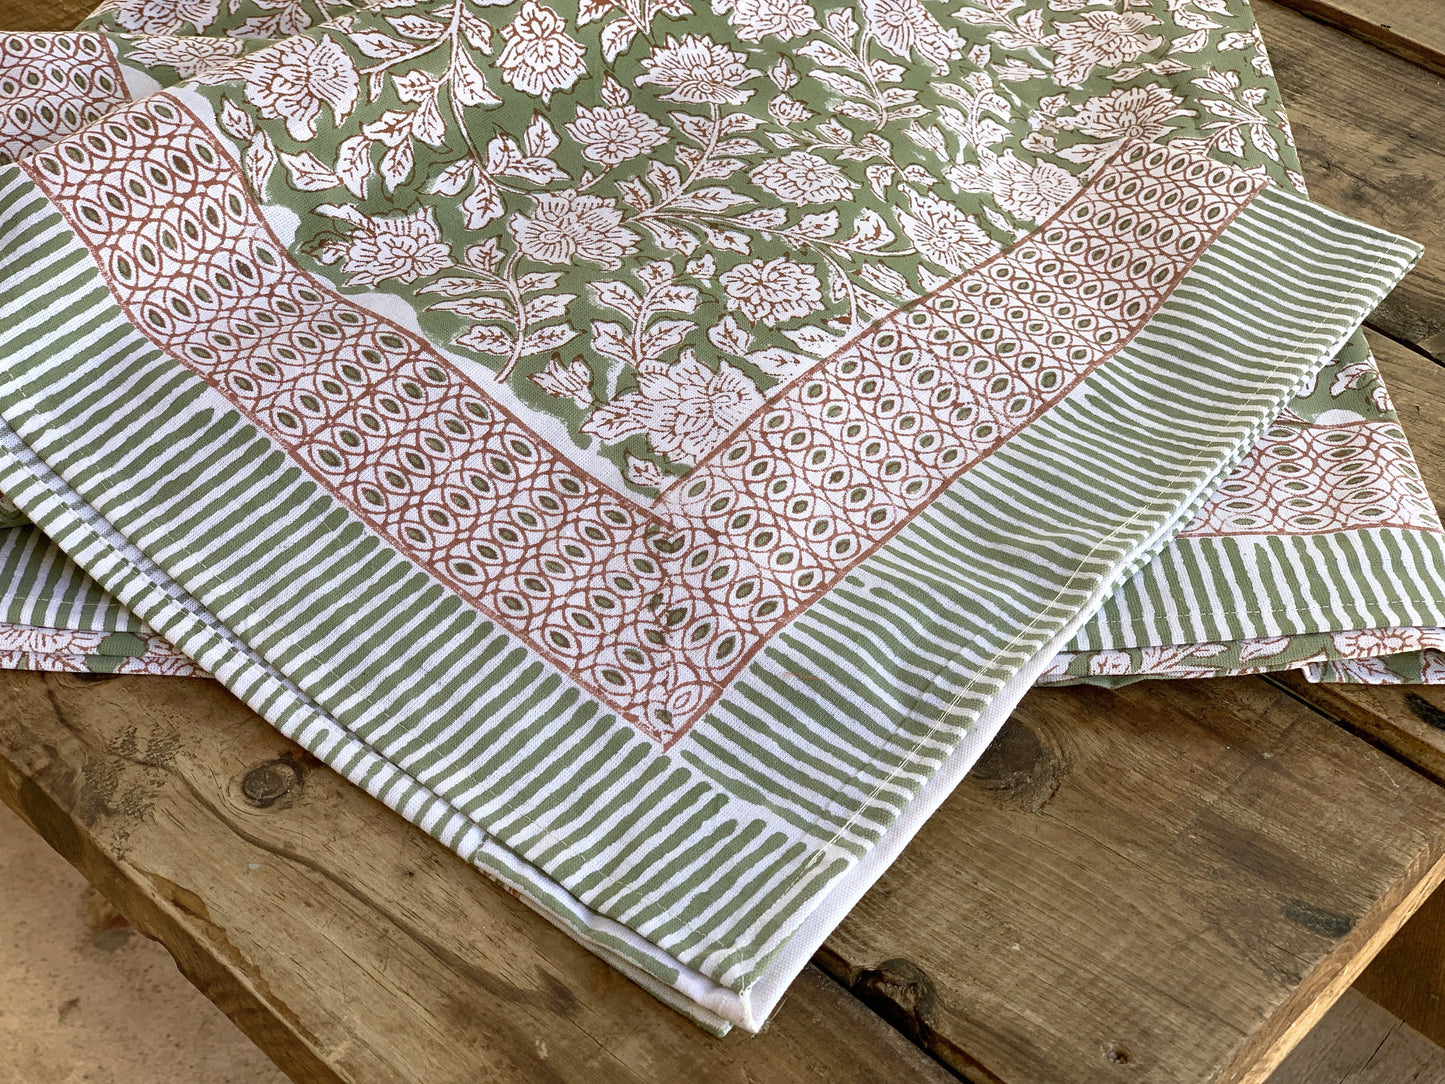 Pure cotton block print tablecloth handmade in India · Six diners · Boho chic tablecloth 100% Indian cotton · Sage green